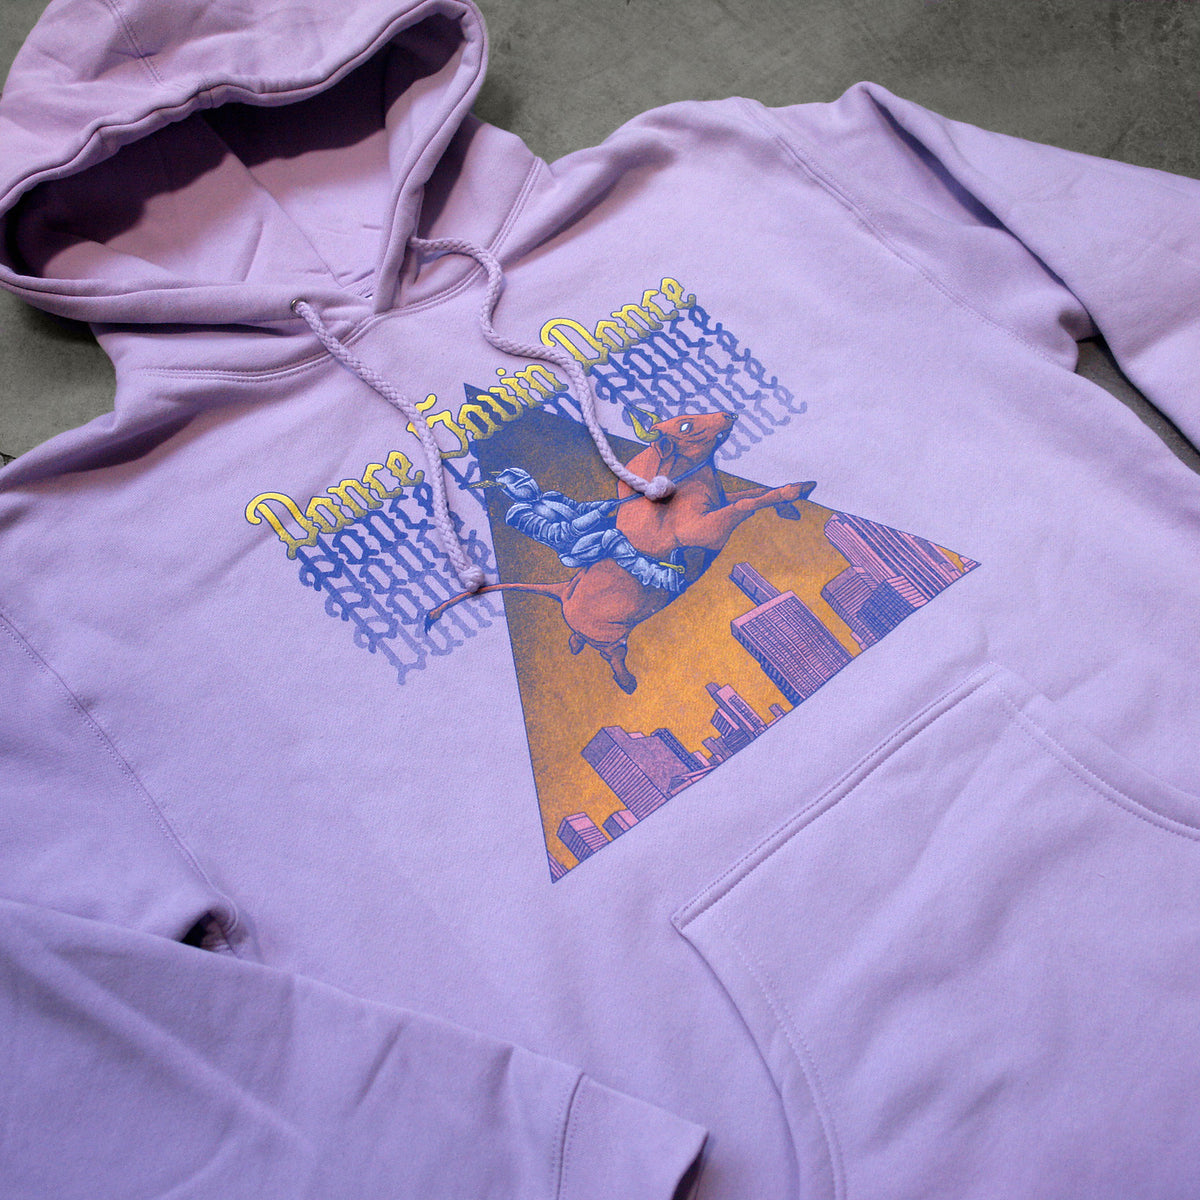 Downtown Battle Mountain 2 (Alternate Reality) Lavender Hoodie - LIMITED QTY AVAILABLE